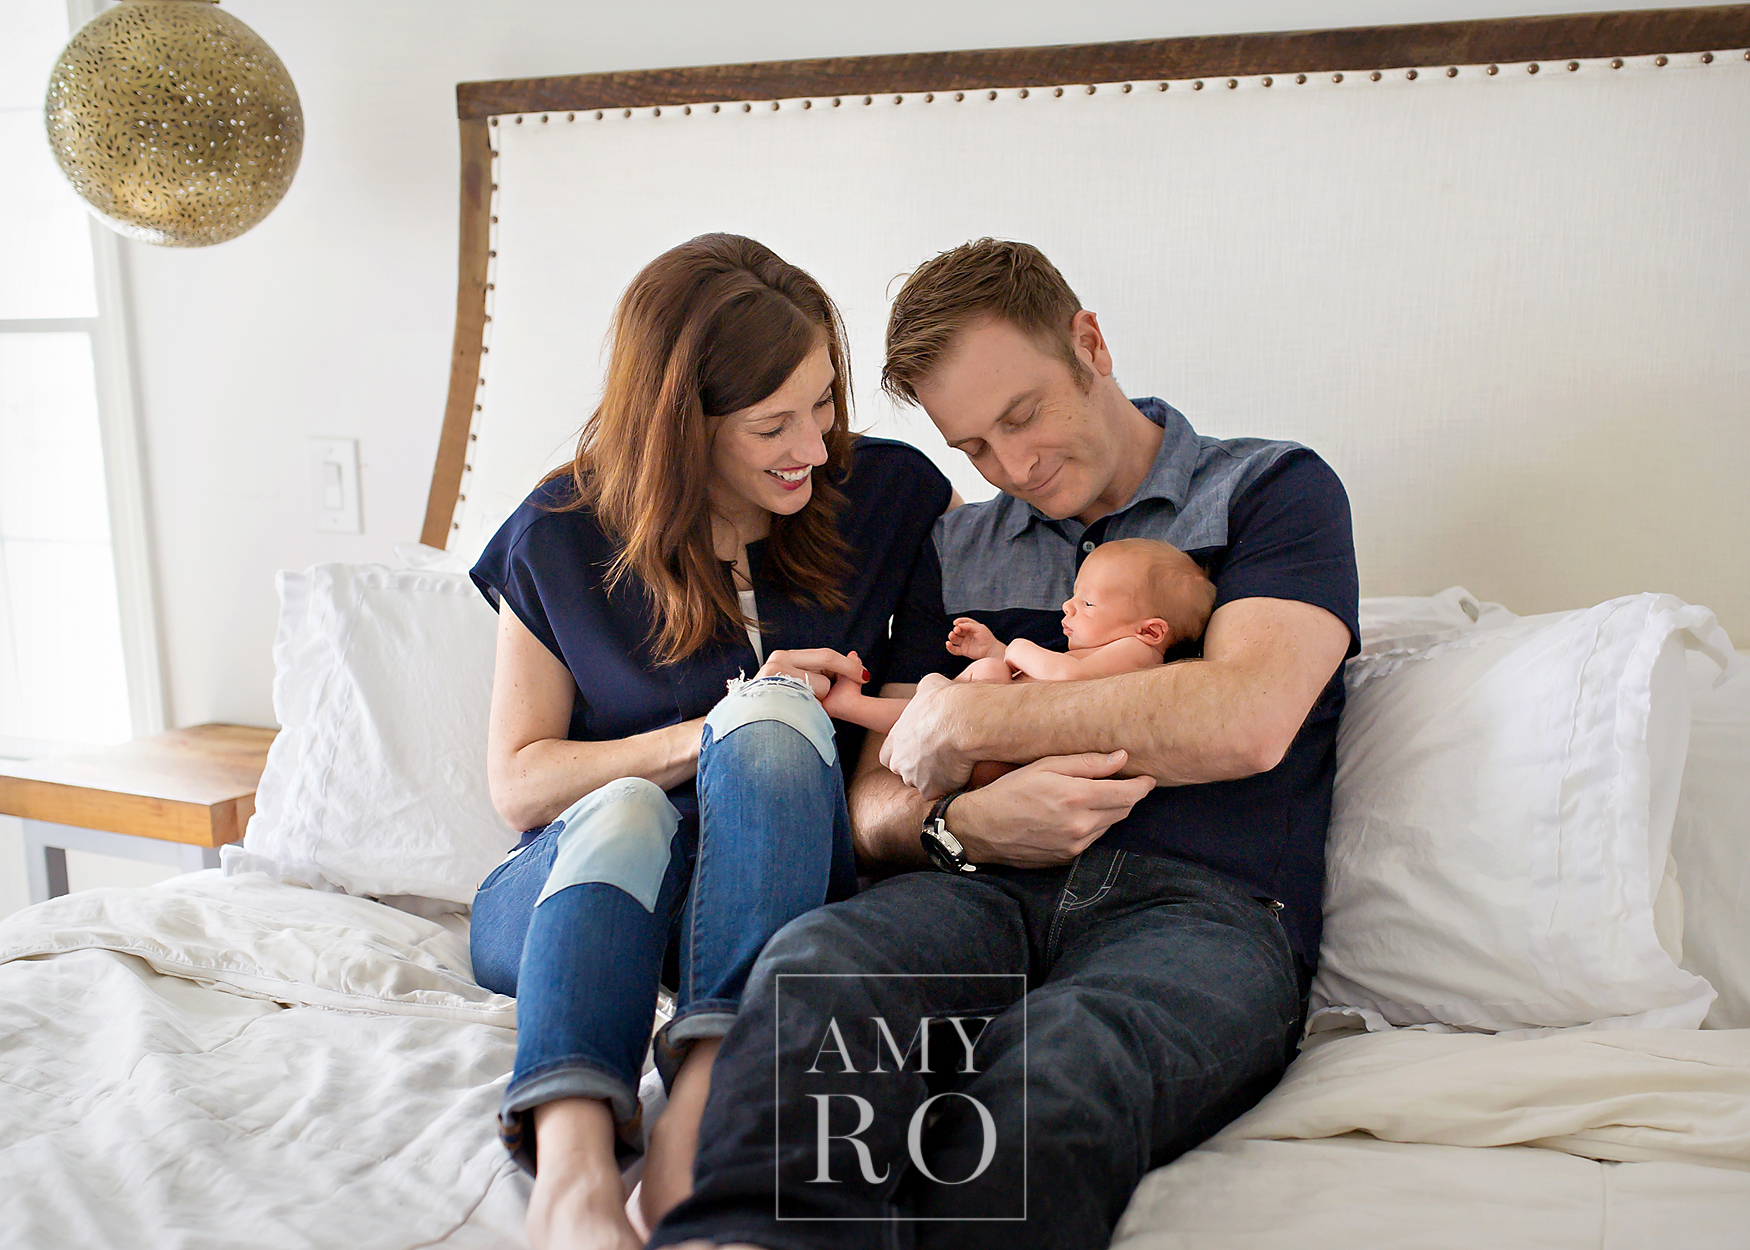 Image of mom and dad with newborn  snuggling on their restoration hardware bed  during an in-home lifestyle newborn session in East Greenwich